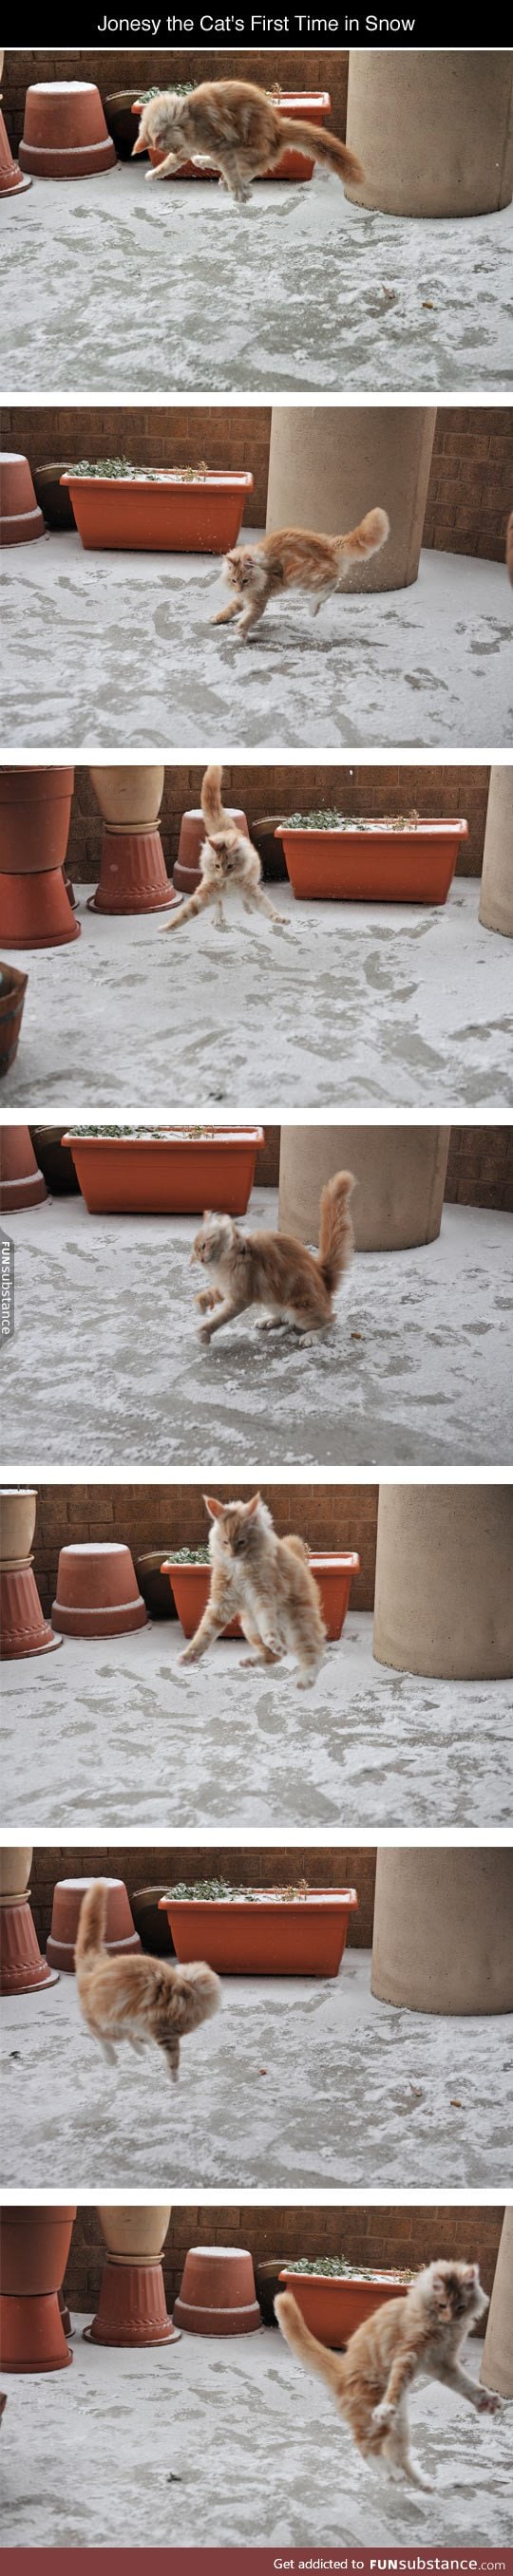 Cat discovers snow